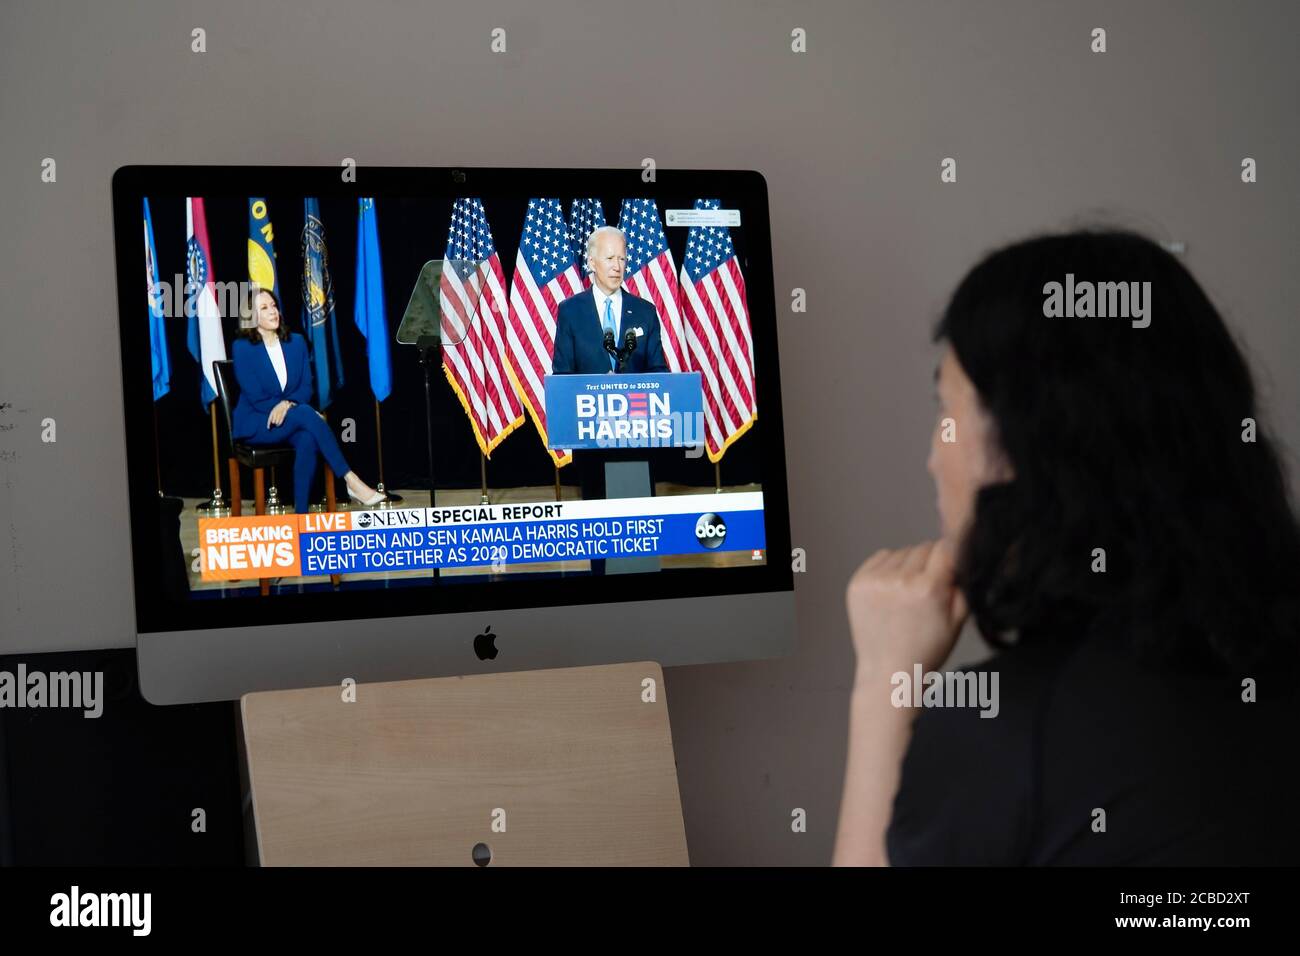 (200812) -- ARLINGTON (U.S.), Aug. 12, 2020 (Xinhua) -- A woman at a house in Arlington, Virginia, watches news showing U.S. presumptive Democratic presidential nominee Joe Biden (R, on the screen) speaking at a campaign event together with Kamala Harris in Wilmington, Delaware, the United States, on Aug. 12, 2020. U.S. presumptive Democratic presidential nominee Joe Biden attended Wednesday a campaign event in his hometown of Wilmington, together with Kamala Harris, his choice of Democratic vice presidential candidate, in what was the duo's first public appearance as running mates. (Xinhua/Li Stock Photo